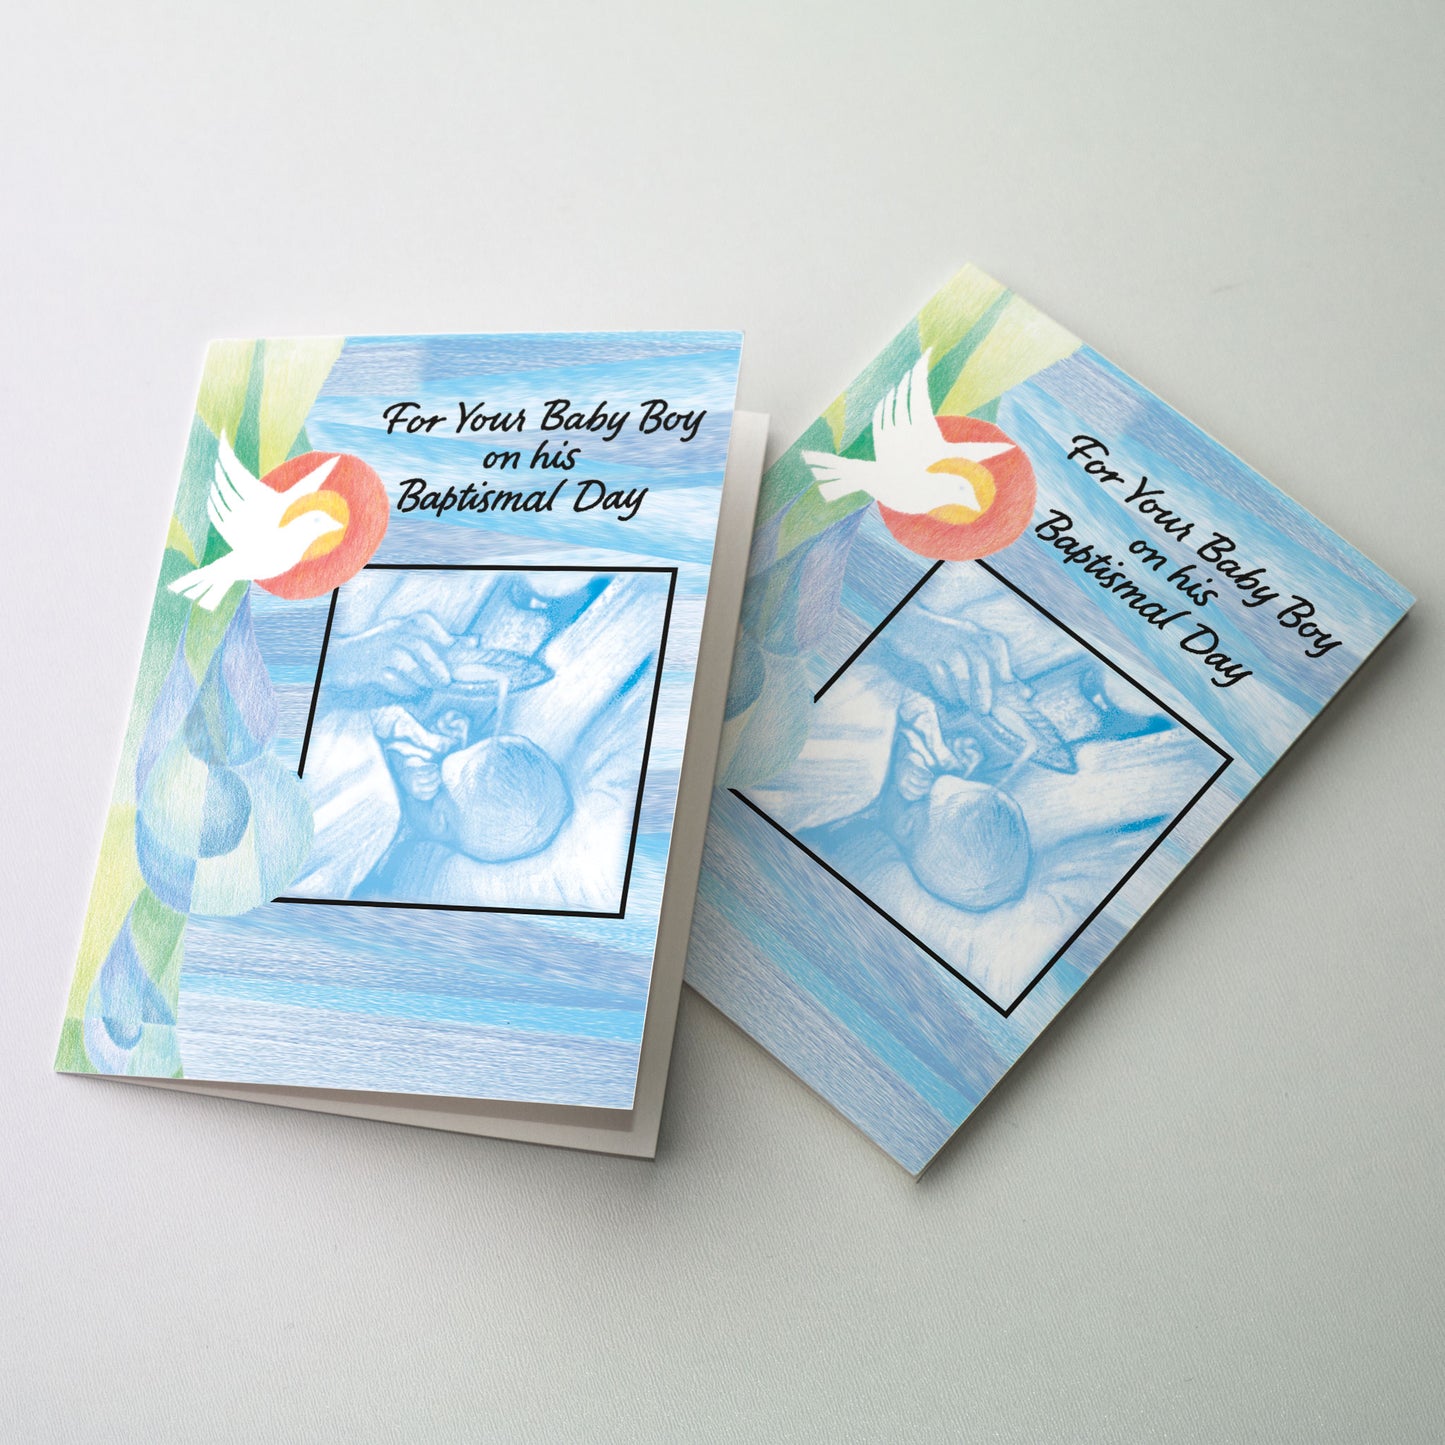 For Your Baby Boy on His Baptismal Day - Baptism Card